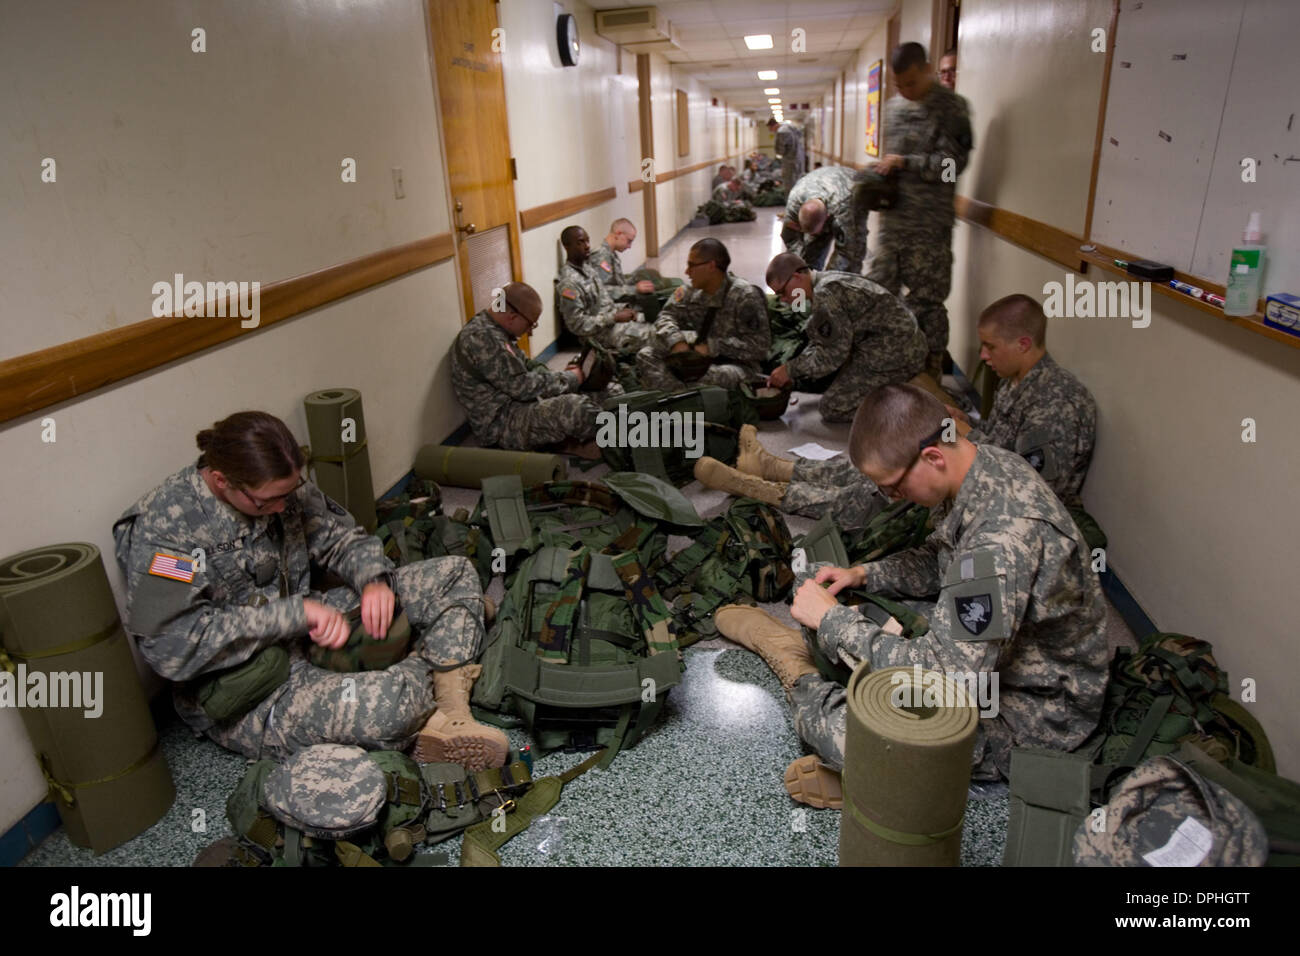 Jul. 13, 2006 - West Point, New York, U.S. - On day 5 of Cadet Basic Training, some of the New Cadets in Bravo Company sit in the hallway of Eisenhower Barracks while putting together equipment they need for their road march the following day. The year 2006 marks 30 years of women at West Point, United States Military Academy (USMA), as well as all the military academies. In 1975 P Stock Photo